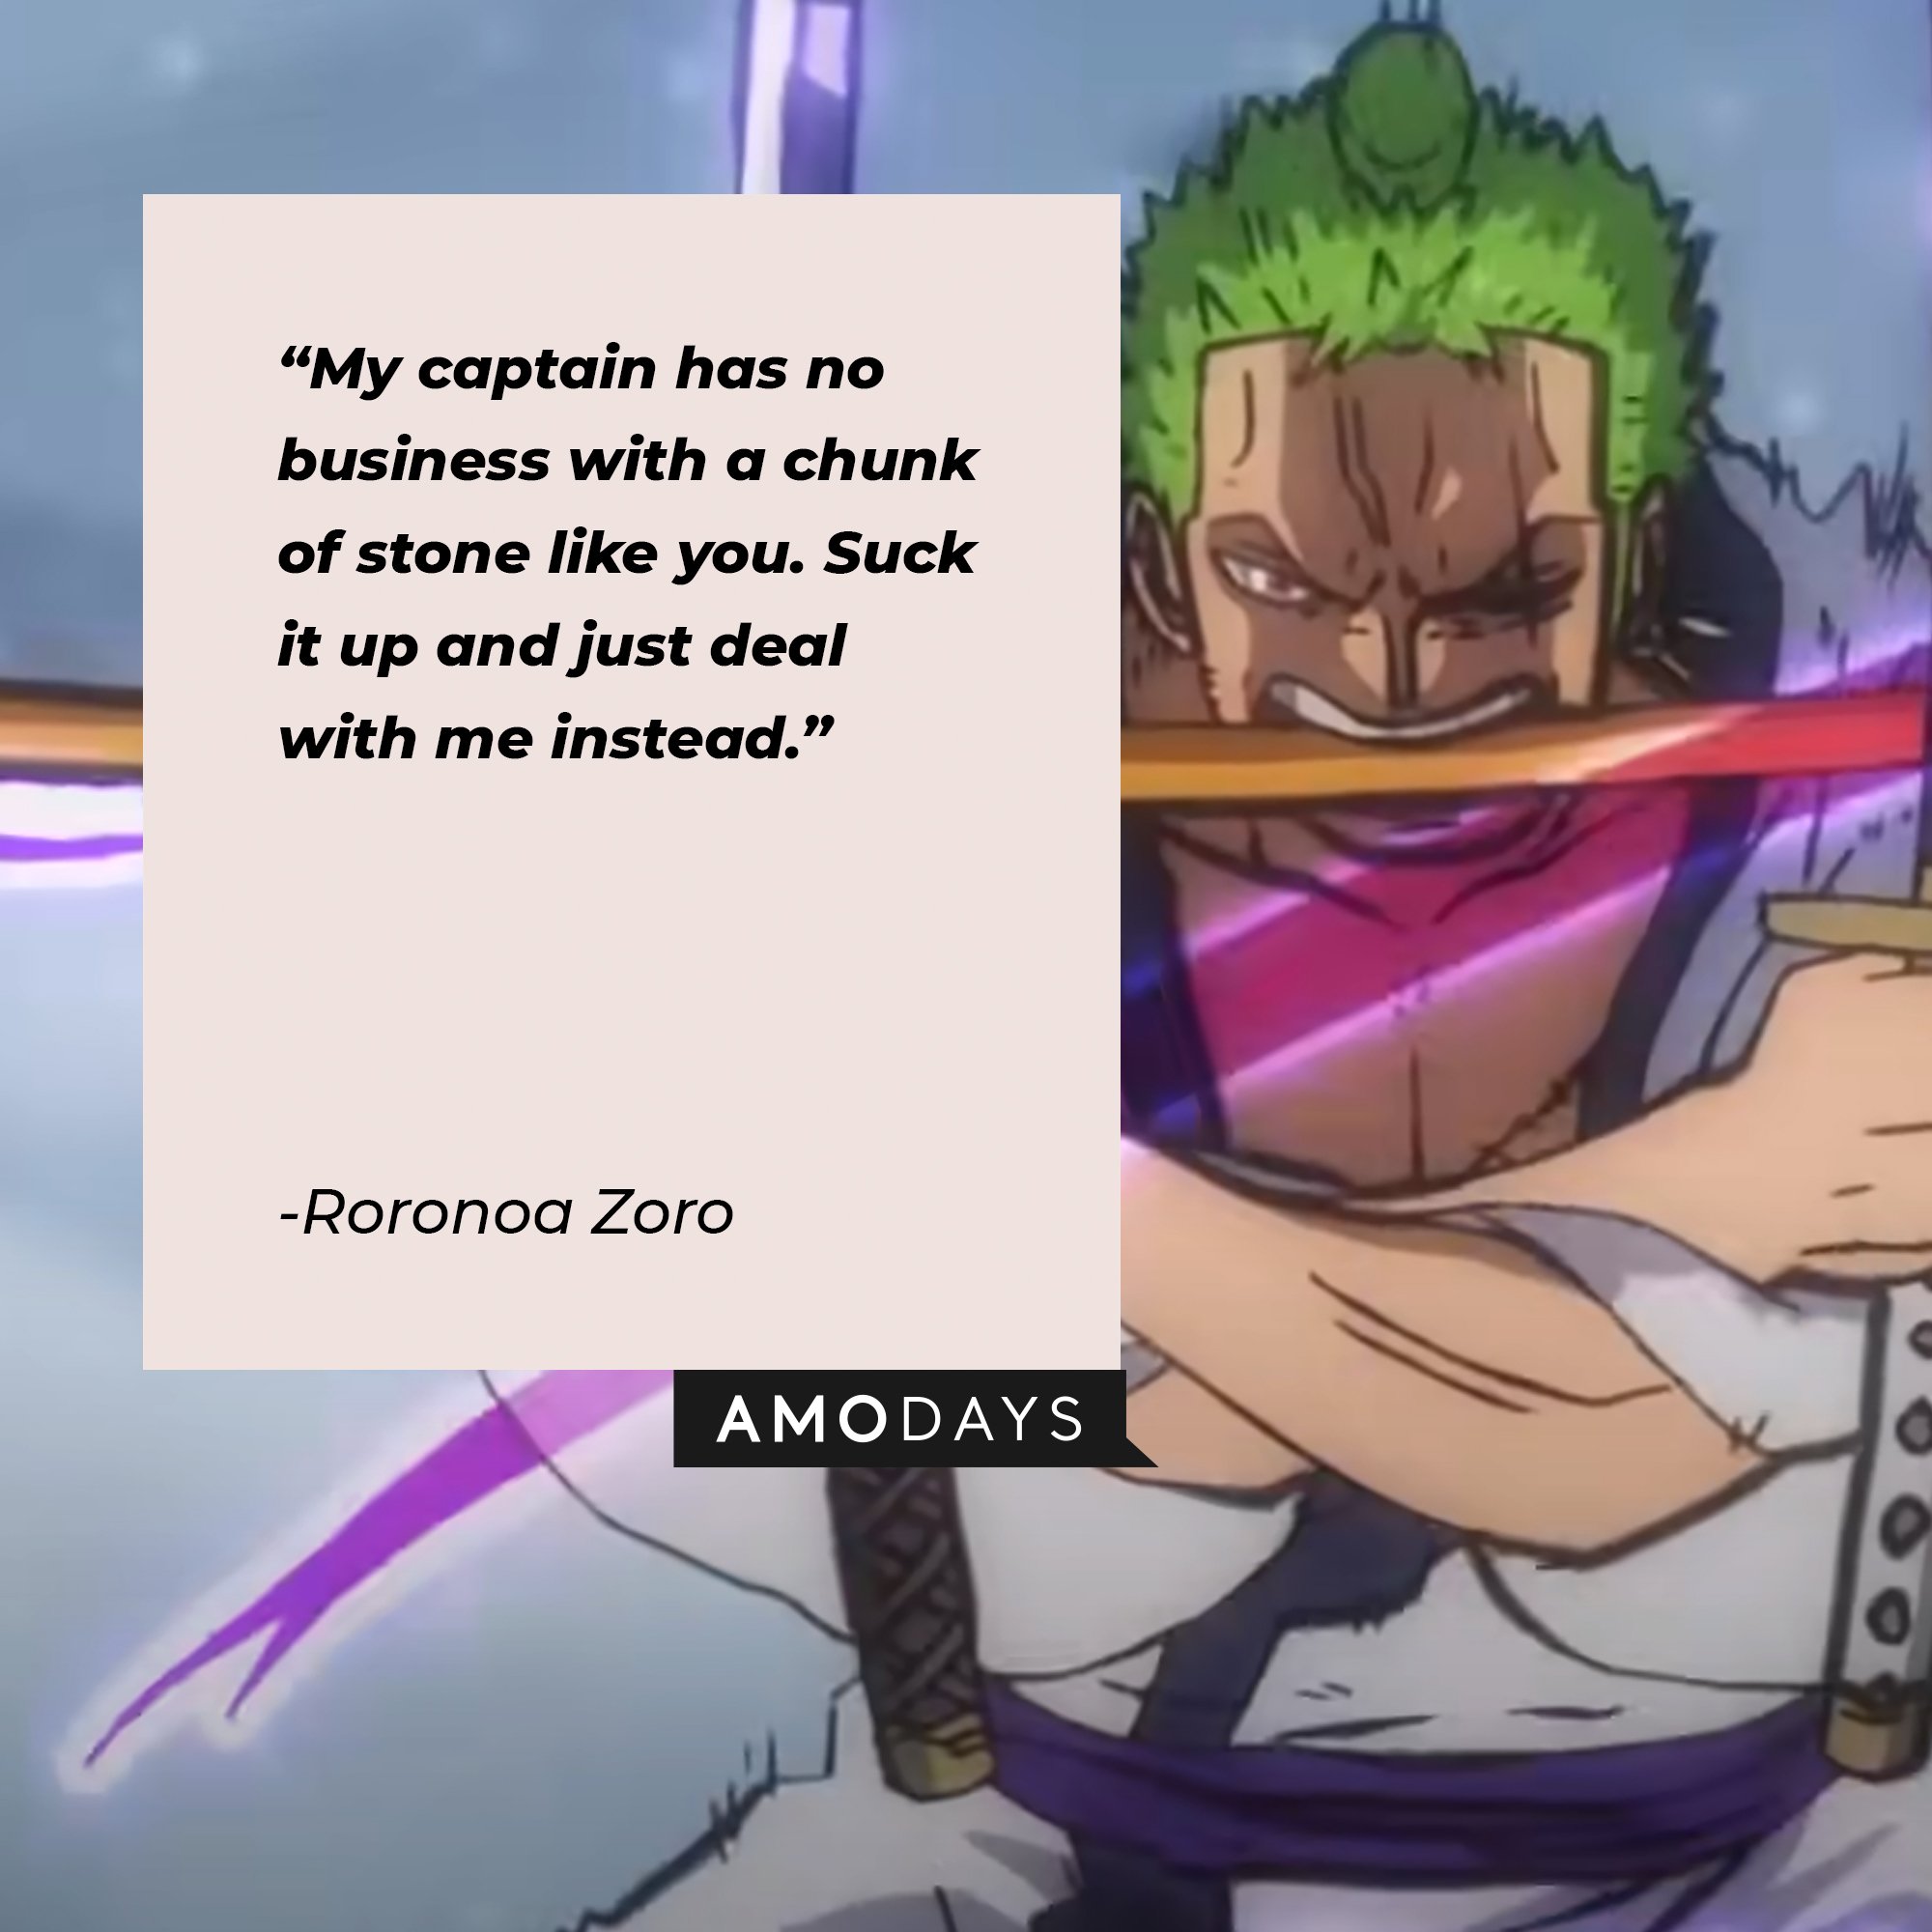 Roronoa Zoro’s quote: "My captain has no business with a chunk of stone like you. Suck it up and just deal with me instead." | Image: AmoDays